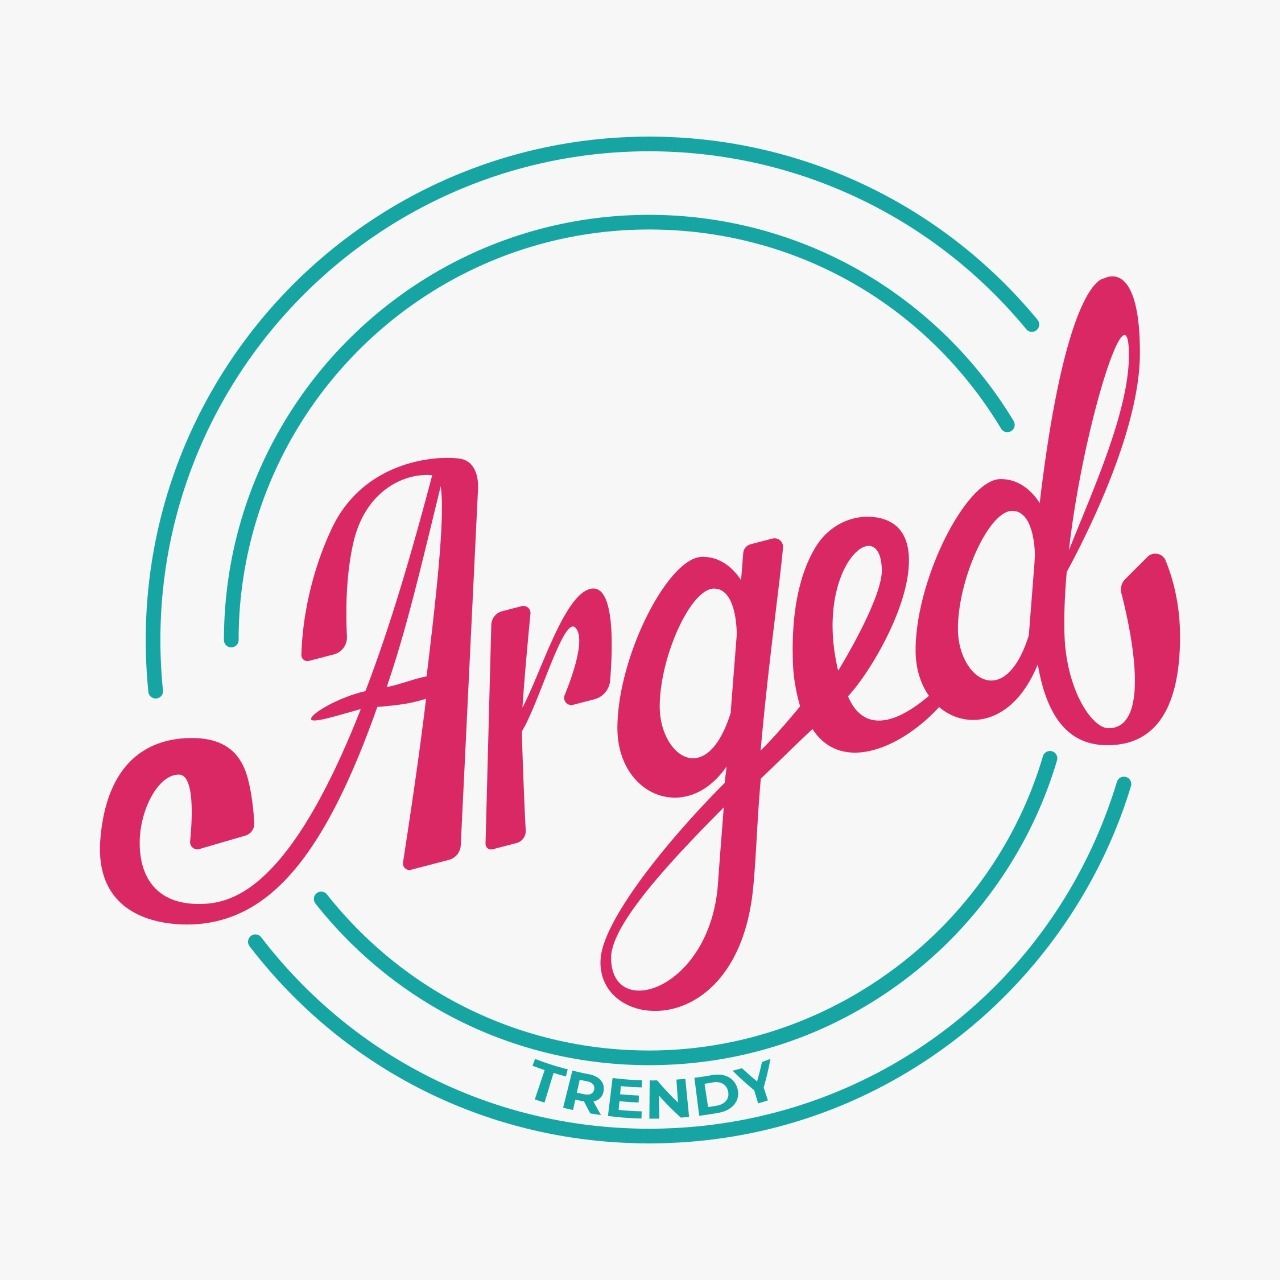 ARGED TRENDY